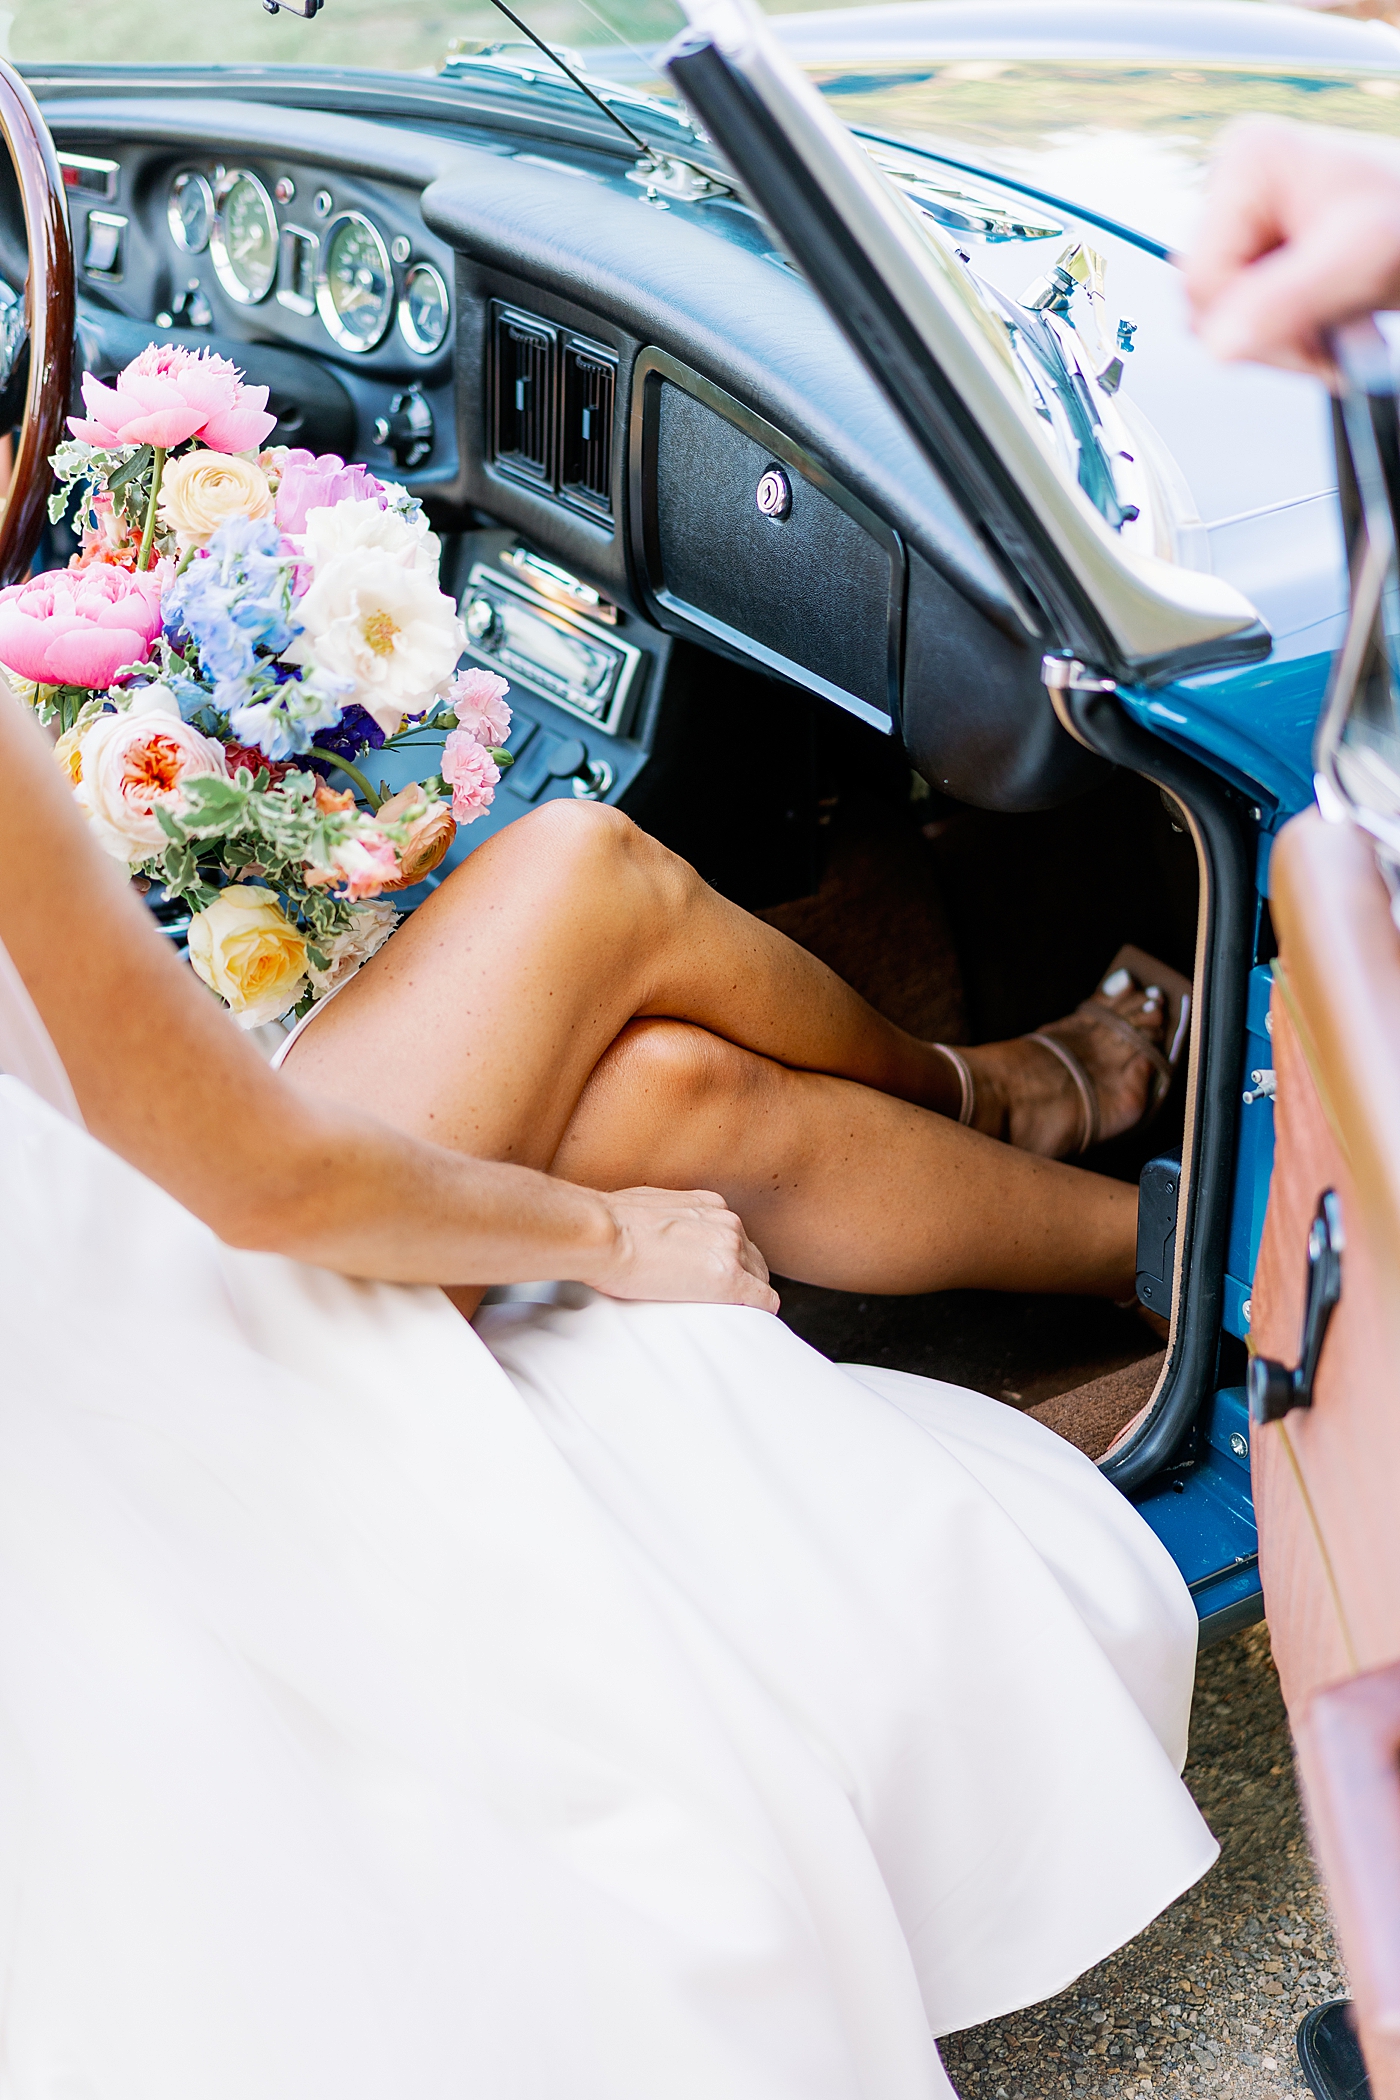  Detail of bride sitting in antique car at Boyd Foundation Horticultural Center| Photo by Annie Laura Photo